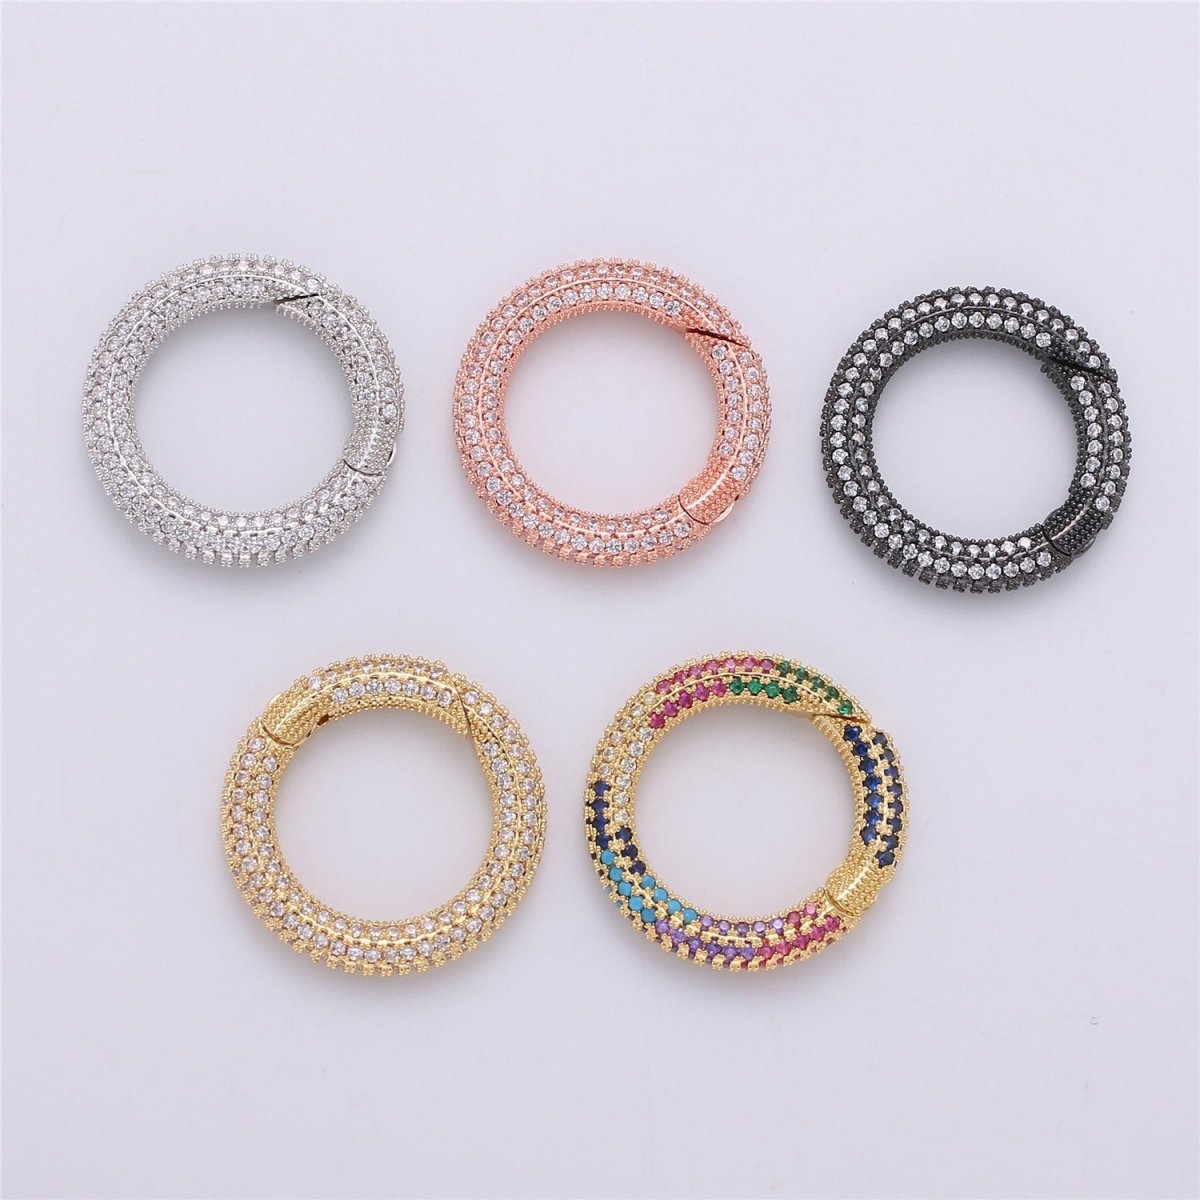 Gold Micro Pave Spring Buckle Metal Snap Clasp Spring gate ring, Trigger Round Ring,Snap Hook for Jewelry Key Chain Handbag Fashion Supply K-369 K-371 - DLUXCA